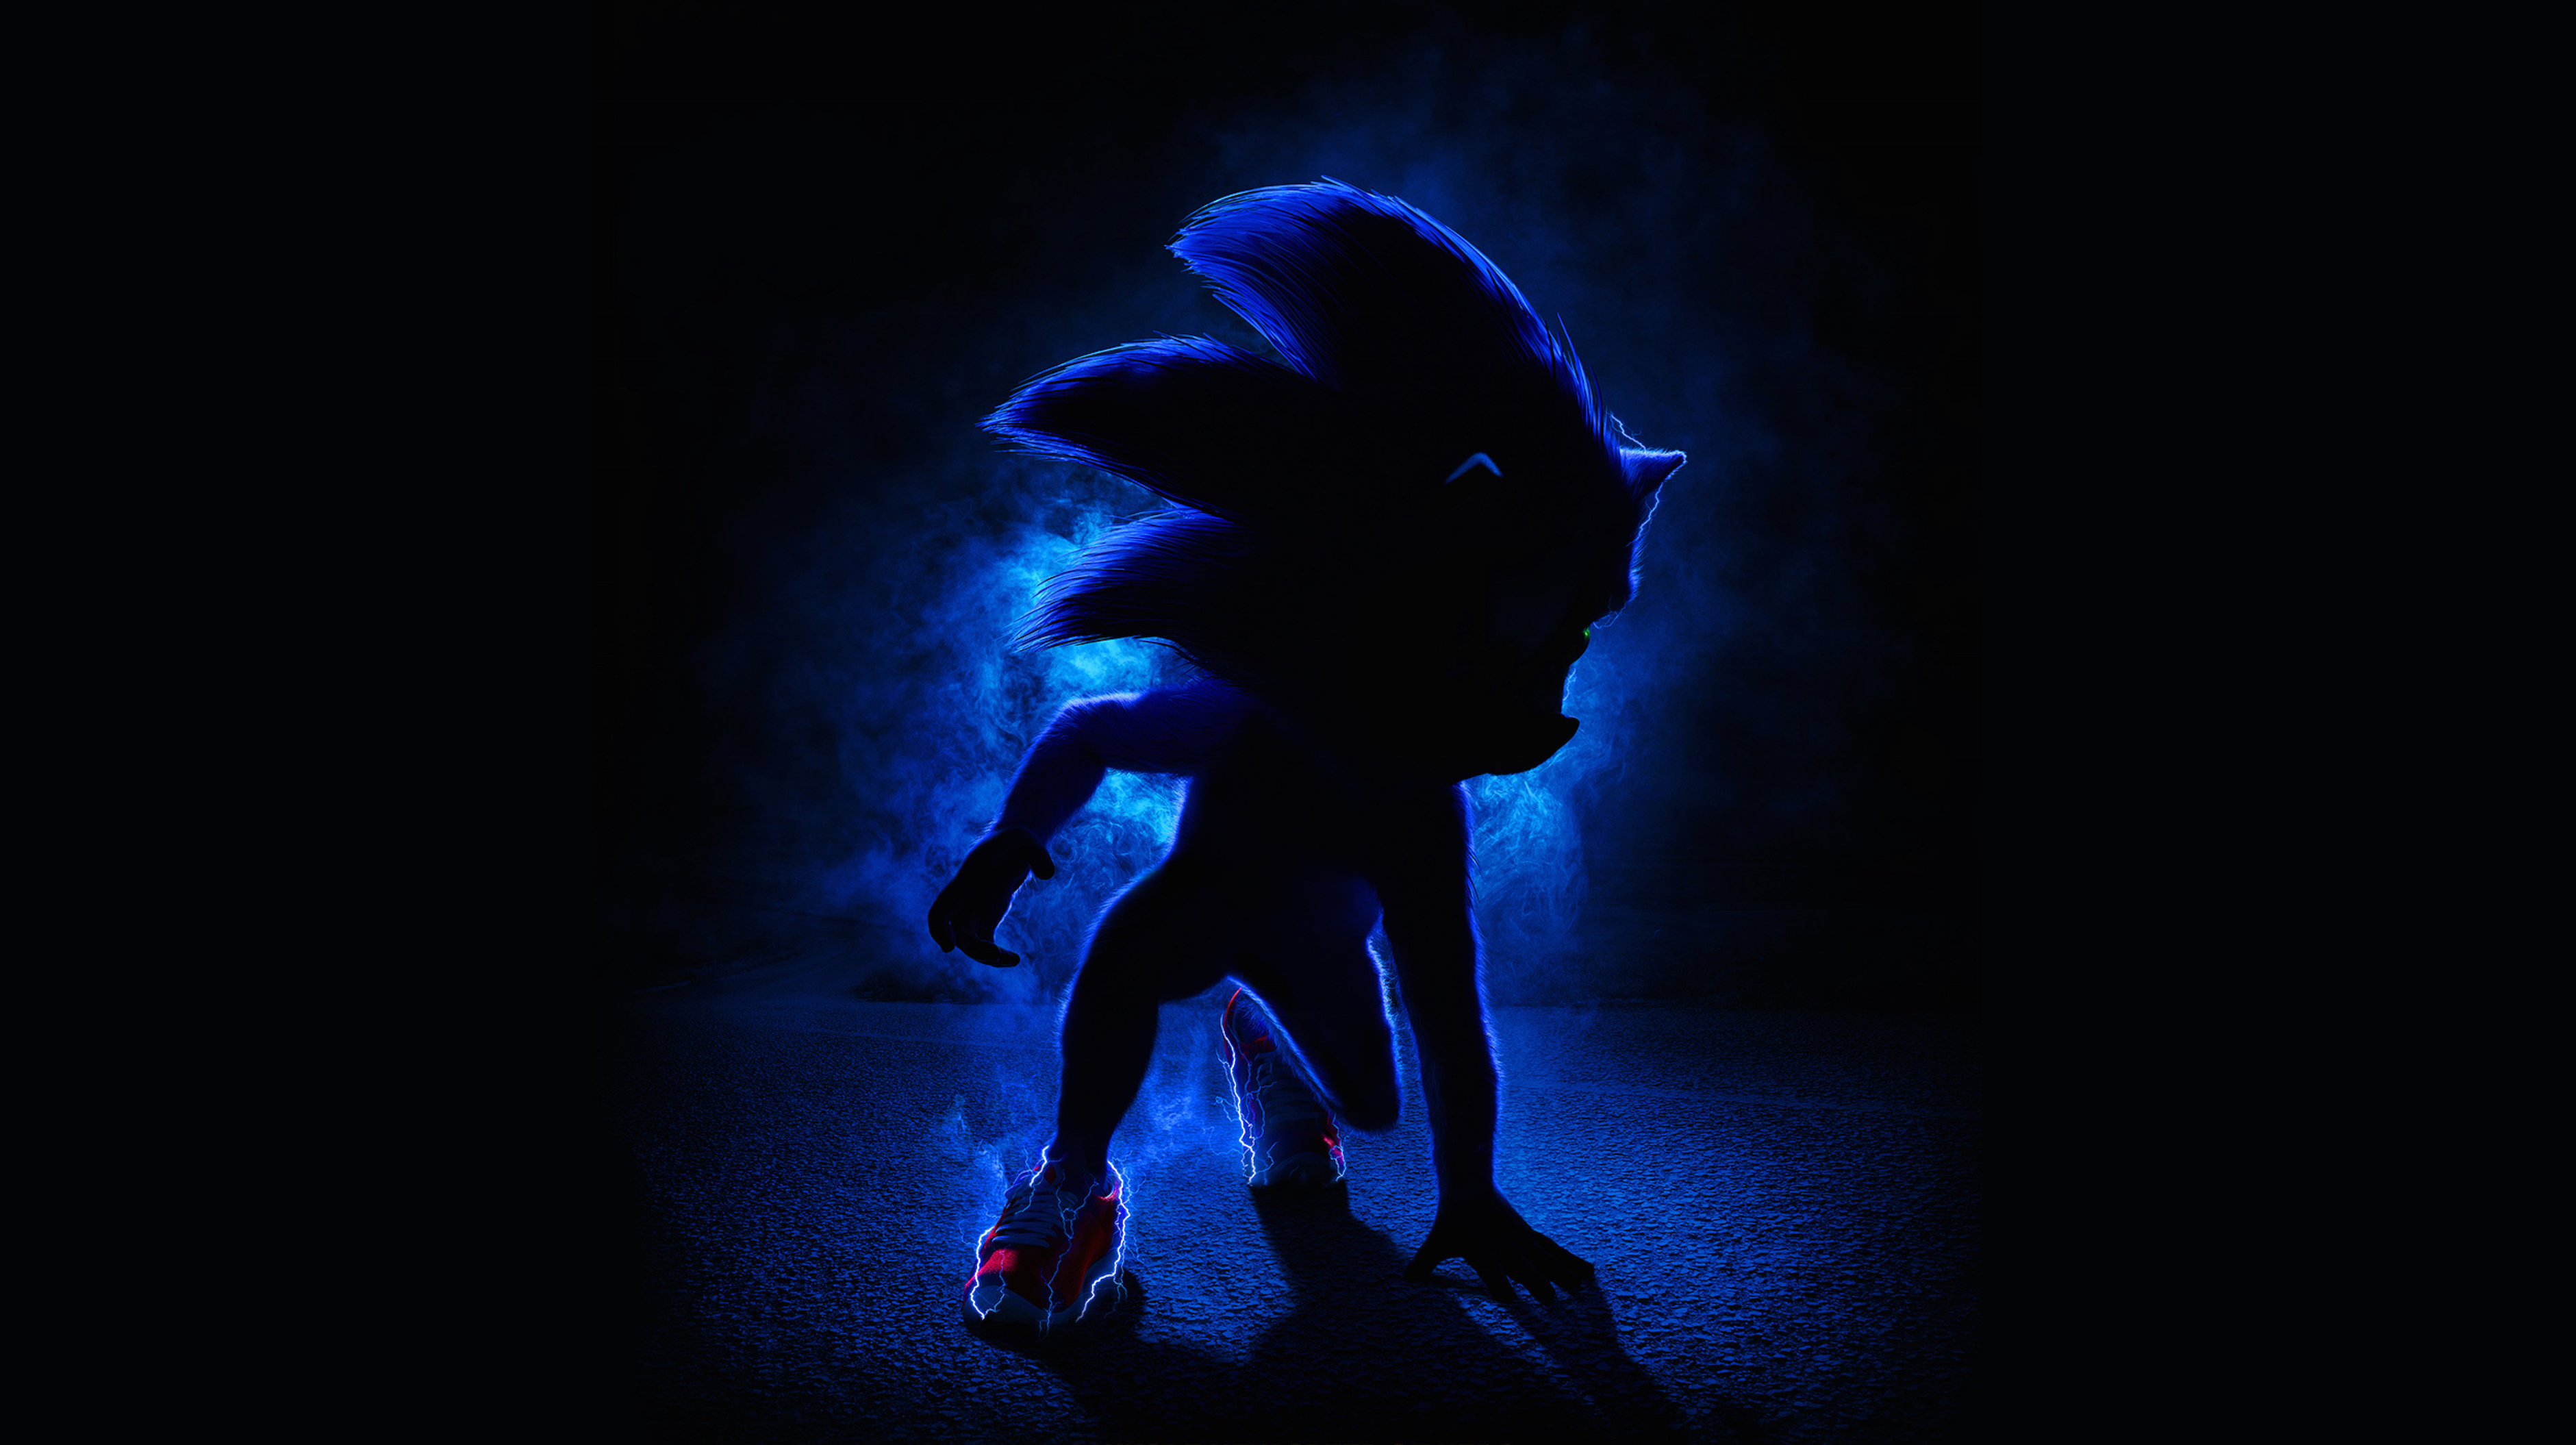 Sonic The Hedgehog 2019 Movie Poster Wallpaper Hd Movies 4k Wallpapers Images Photos And Background